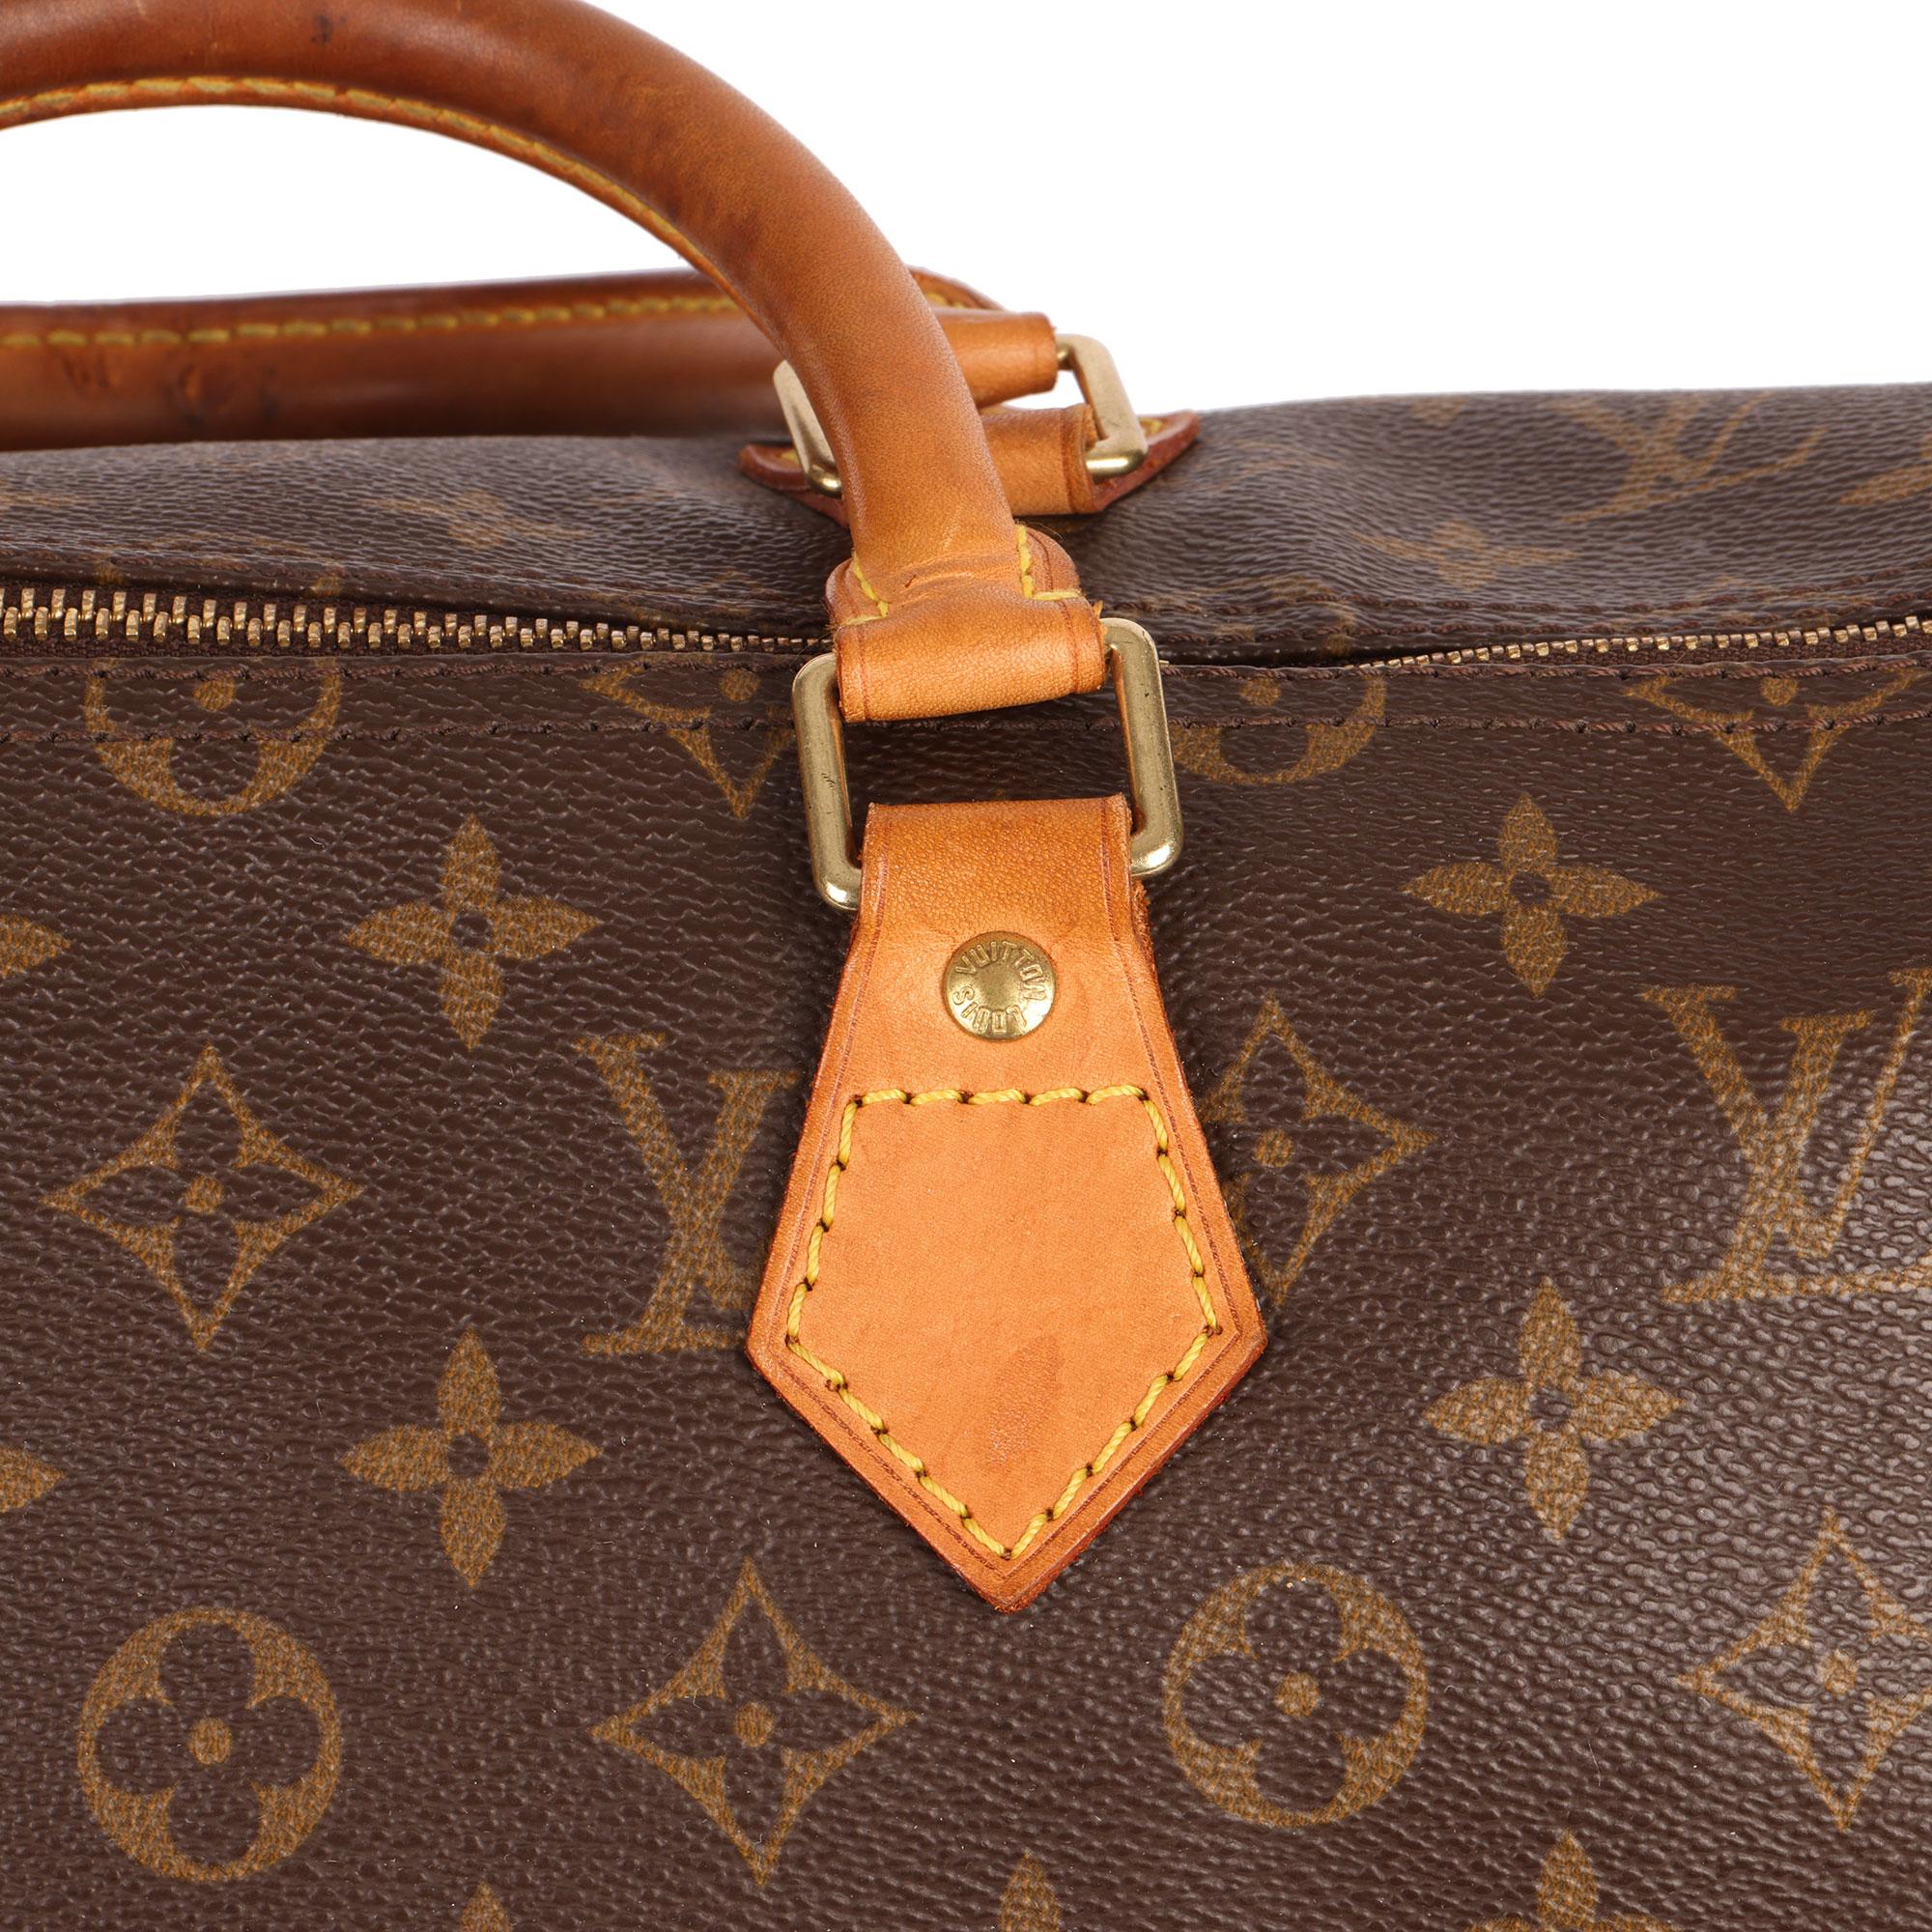 LOUIS VUITTON
Brown Monogram Coated Canvas & Vachetta Leather Vintage Speedy 35

Xupes Reference: CB439
Serial Number: MB0071
Age (Circa): 2001
Authenticity Details: Date Stamp (Made in France)
Gender: Ladies
Type: Tote

Colour: Brown
Hardware: